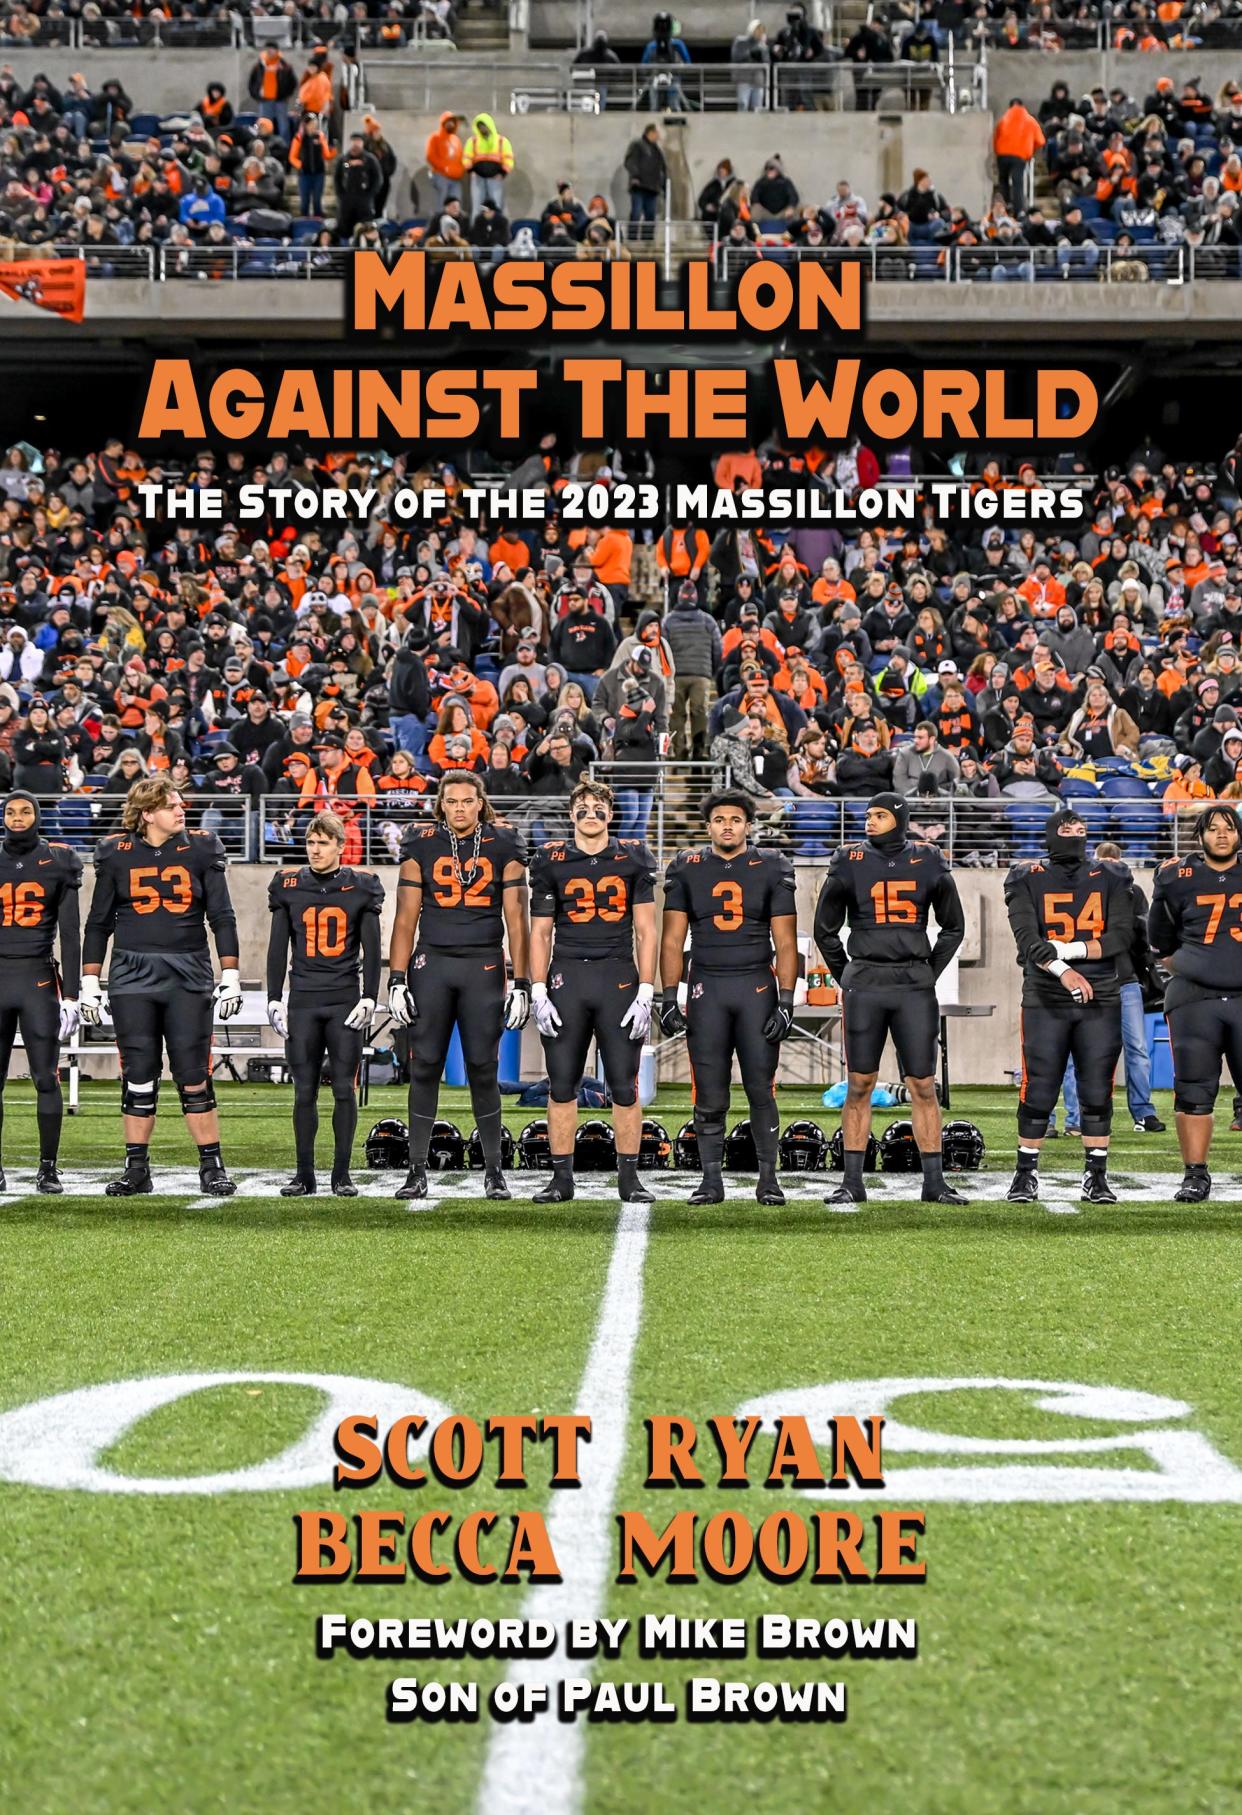 "Massillon Against the World," by Scott Ryan and Becca Moore.